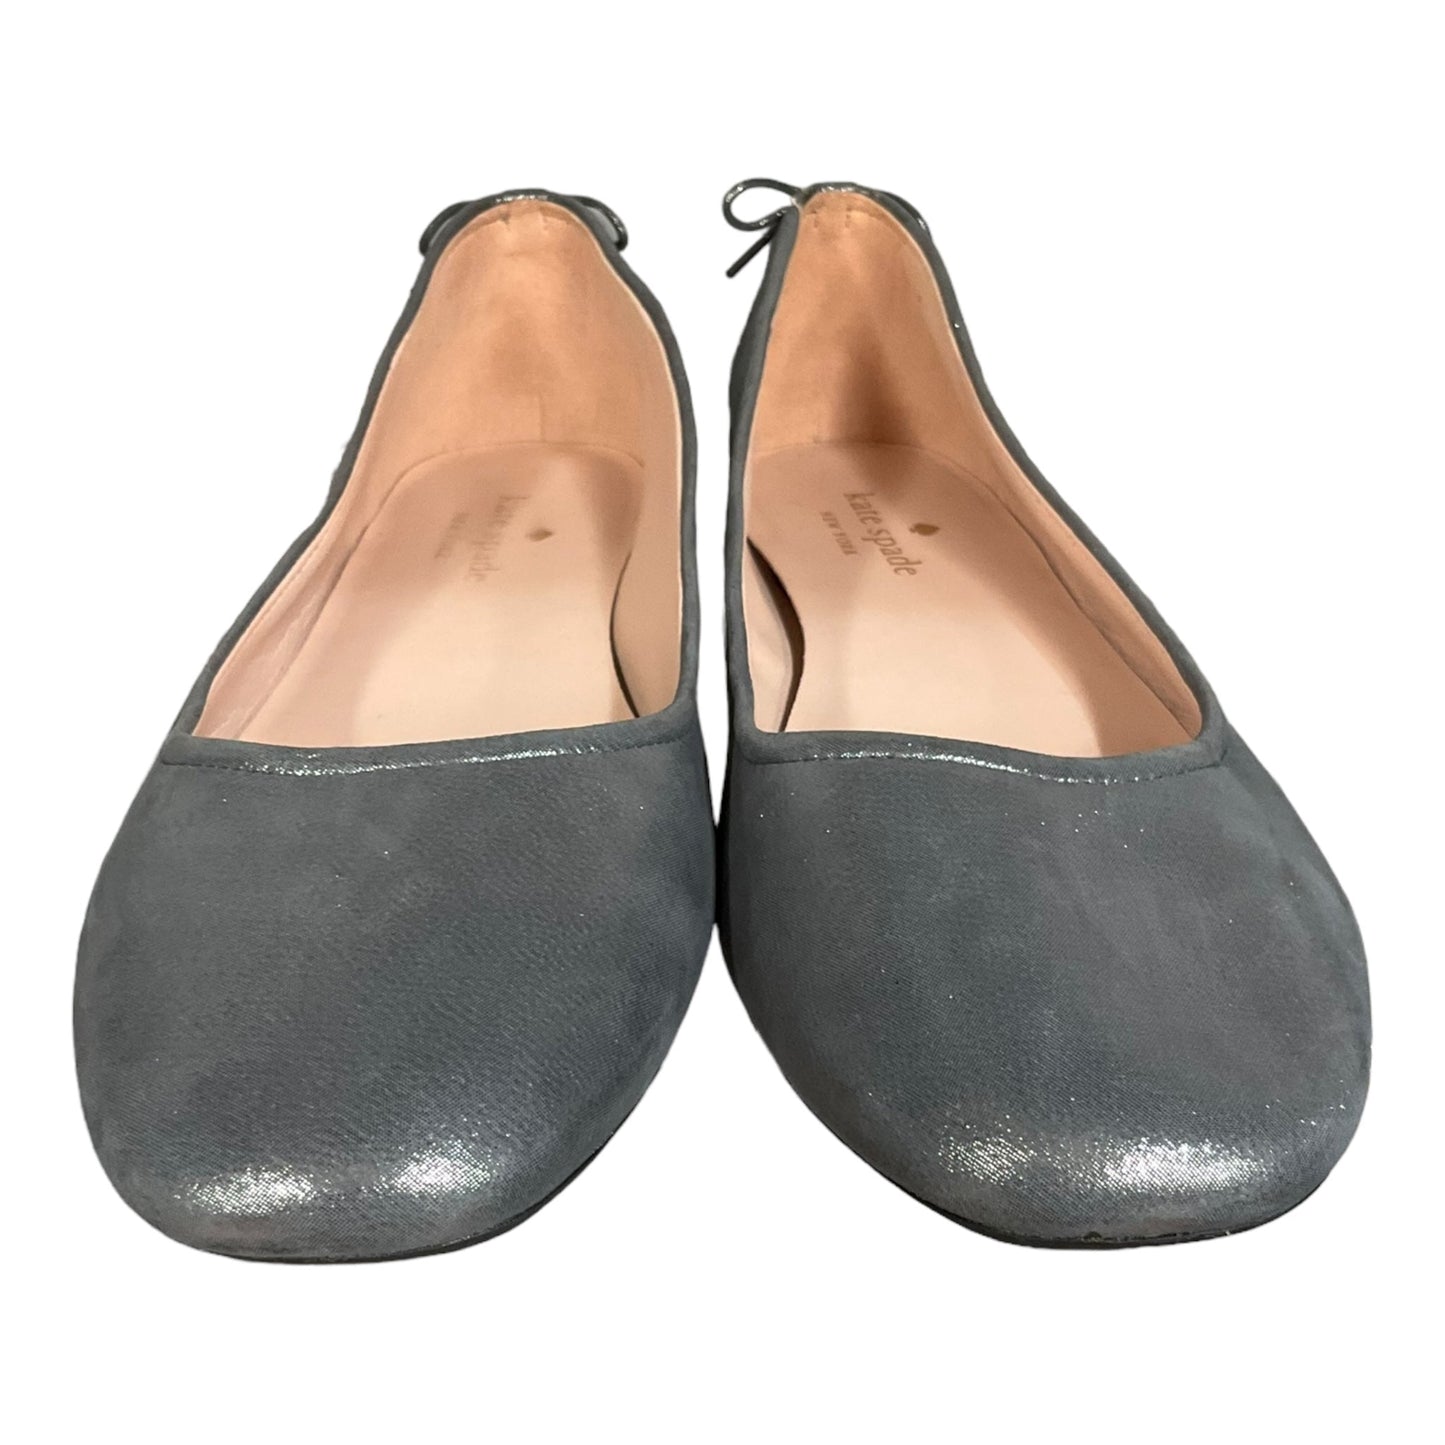 Silver Shoes Flats Kate Spade, Size 10.5